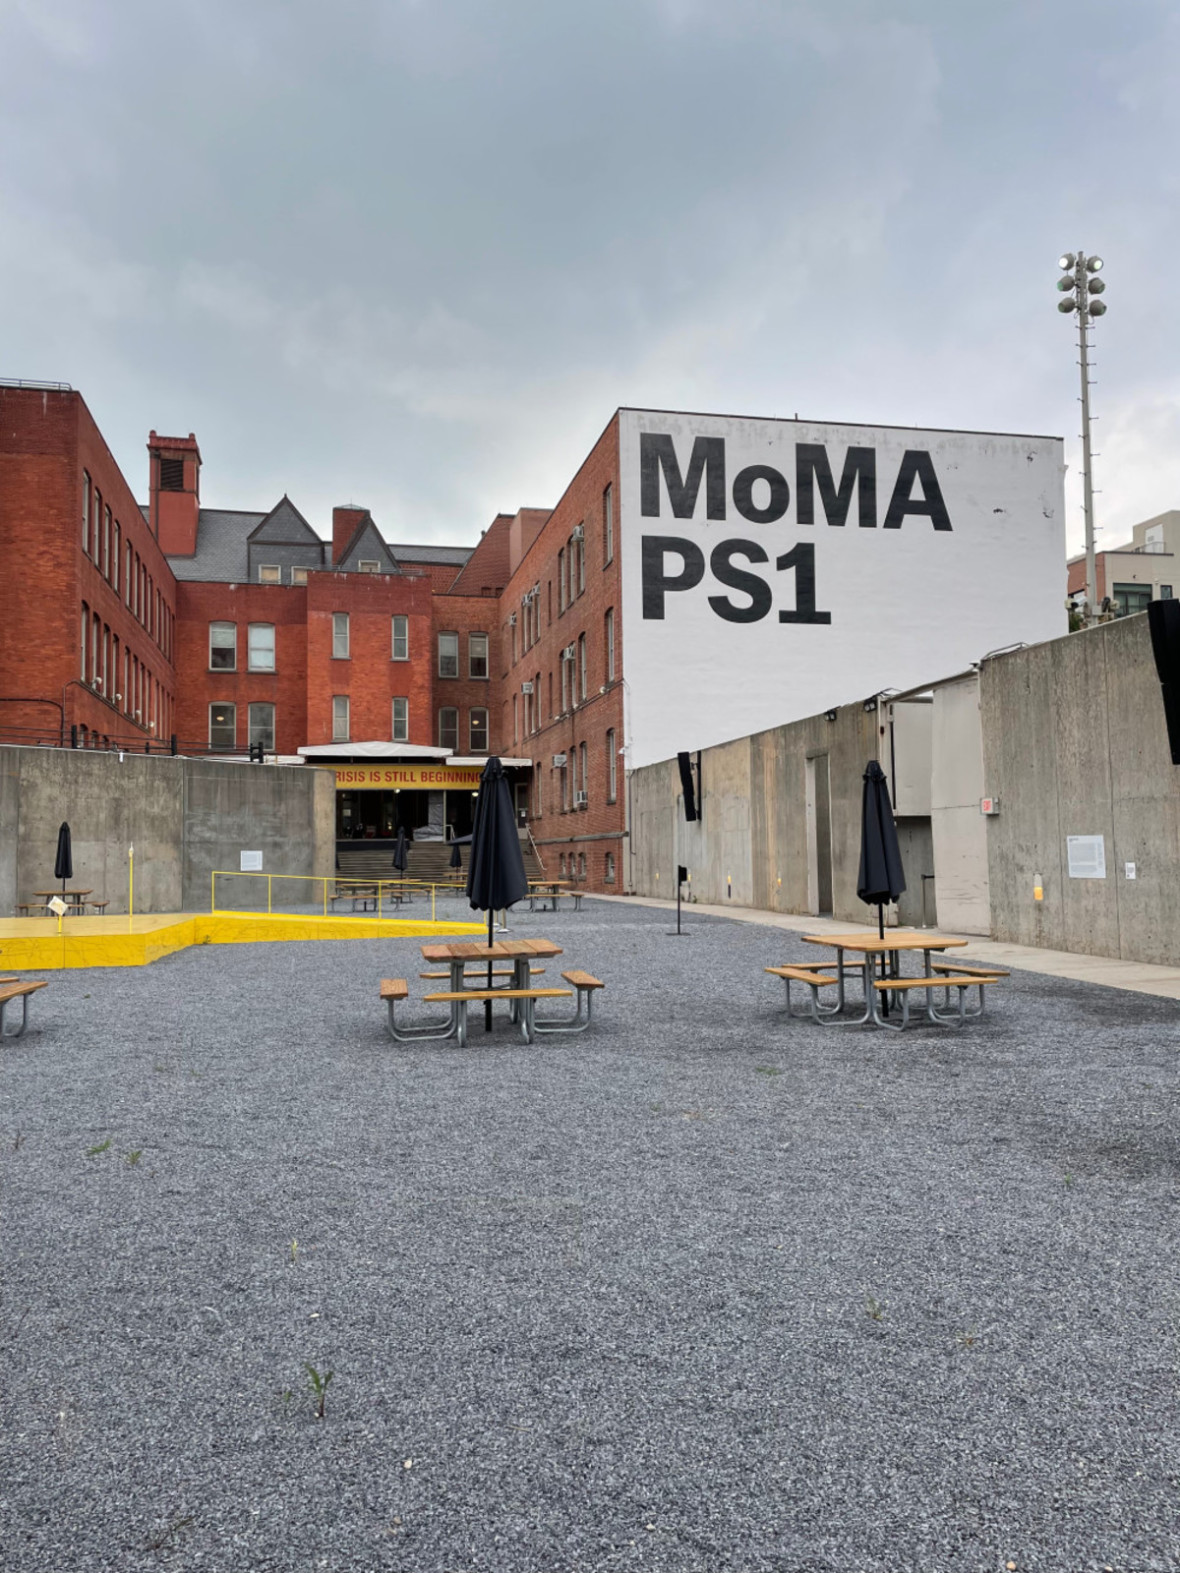 MoMA PS 1 courtyard and exterior